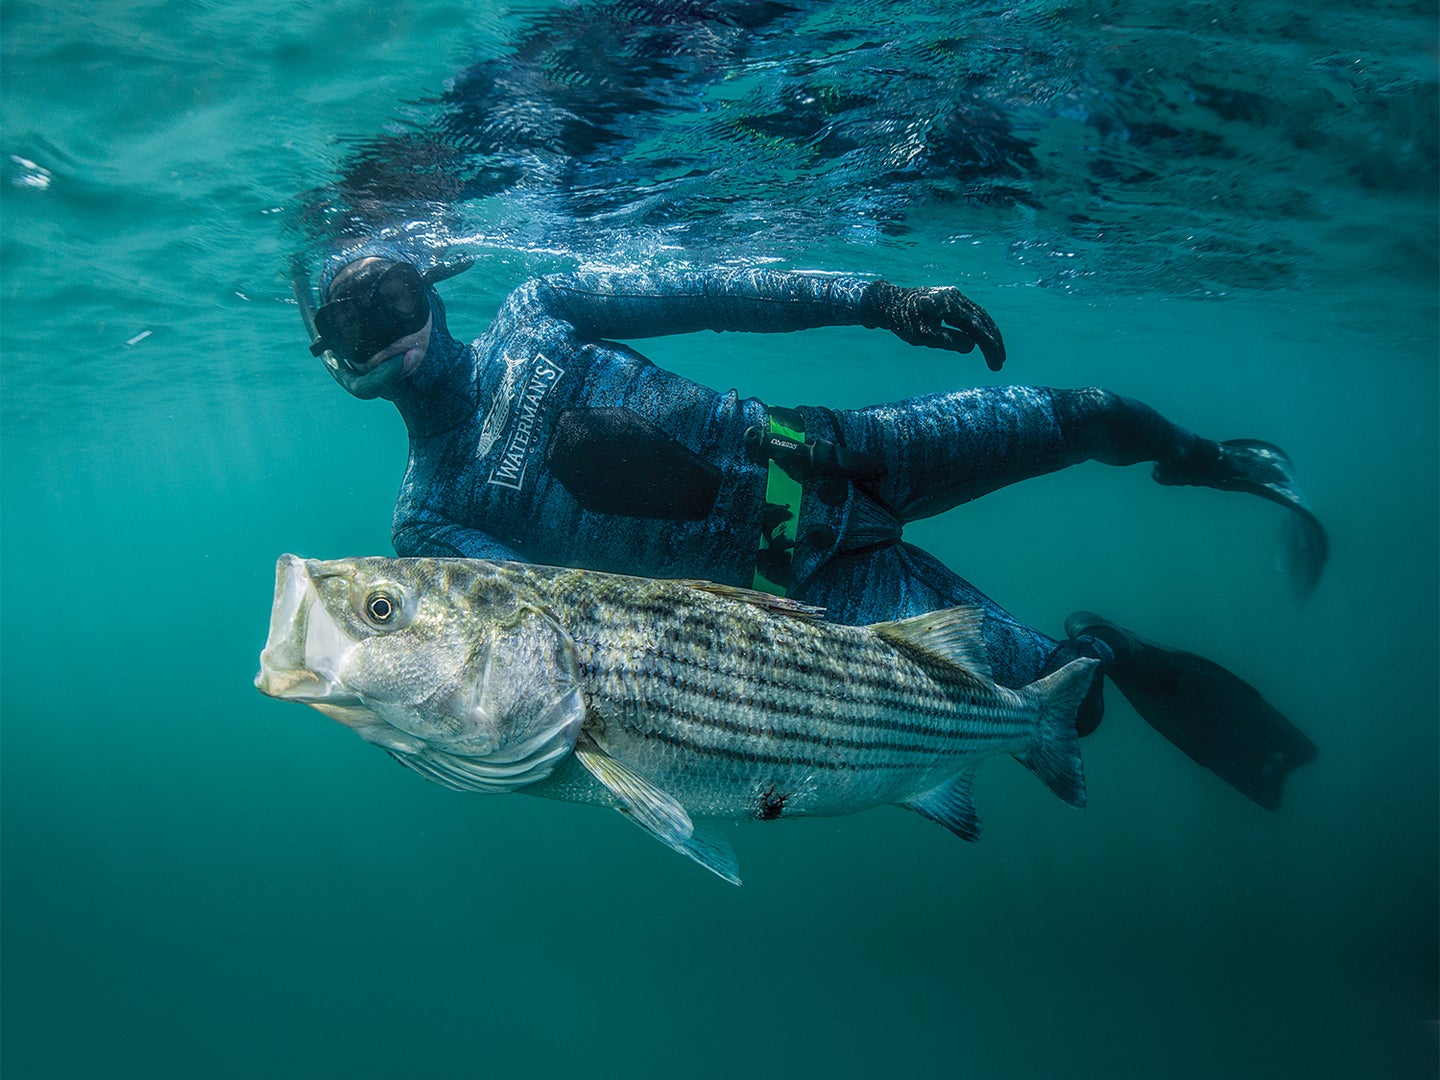 A spearfisher hauling a striped bass through the water.